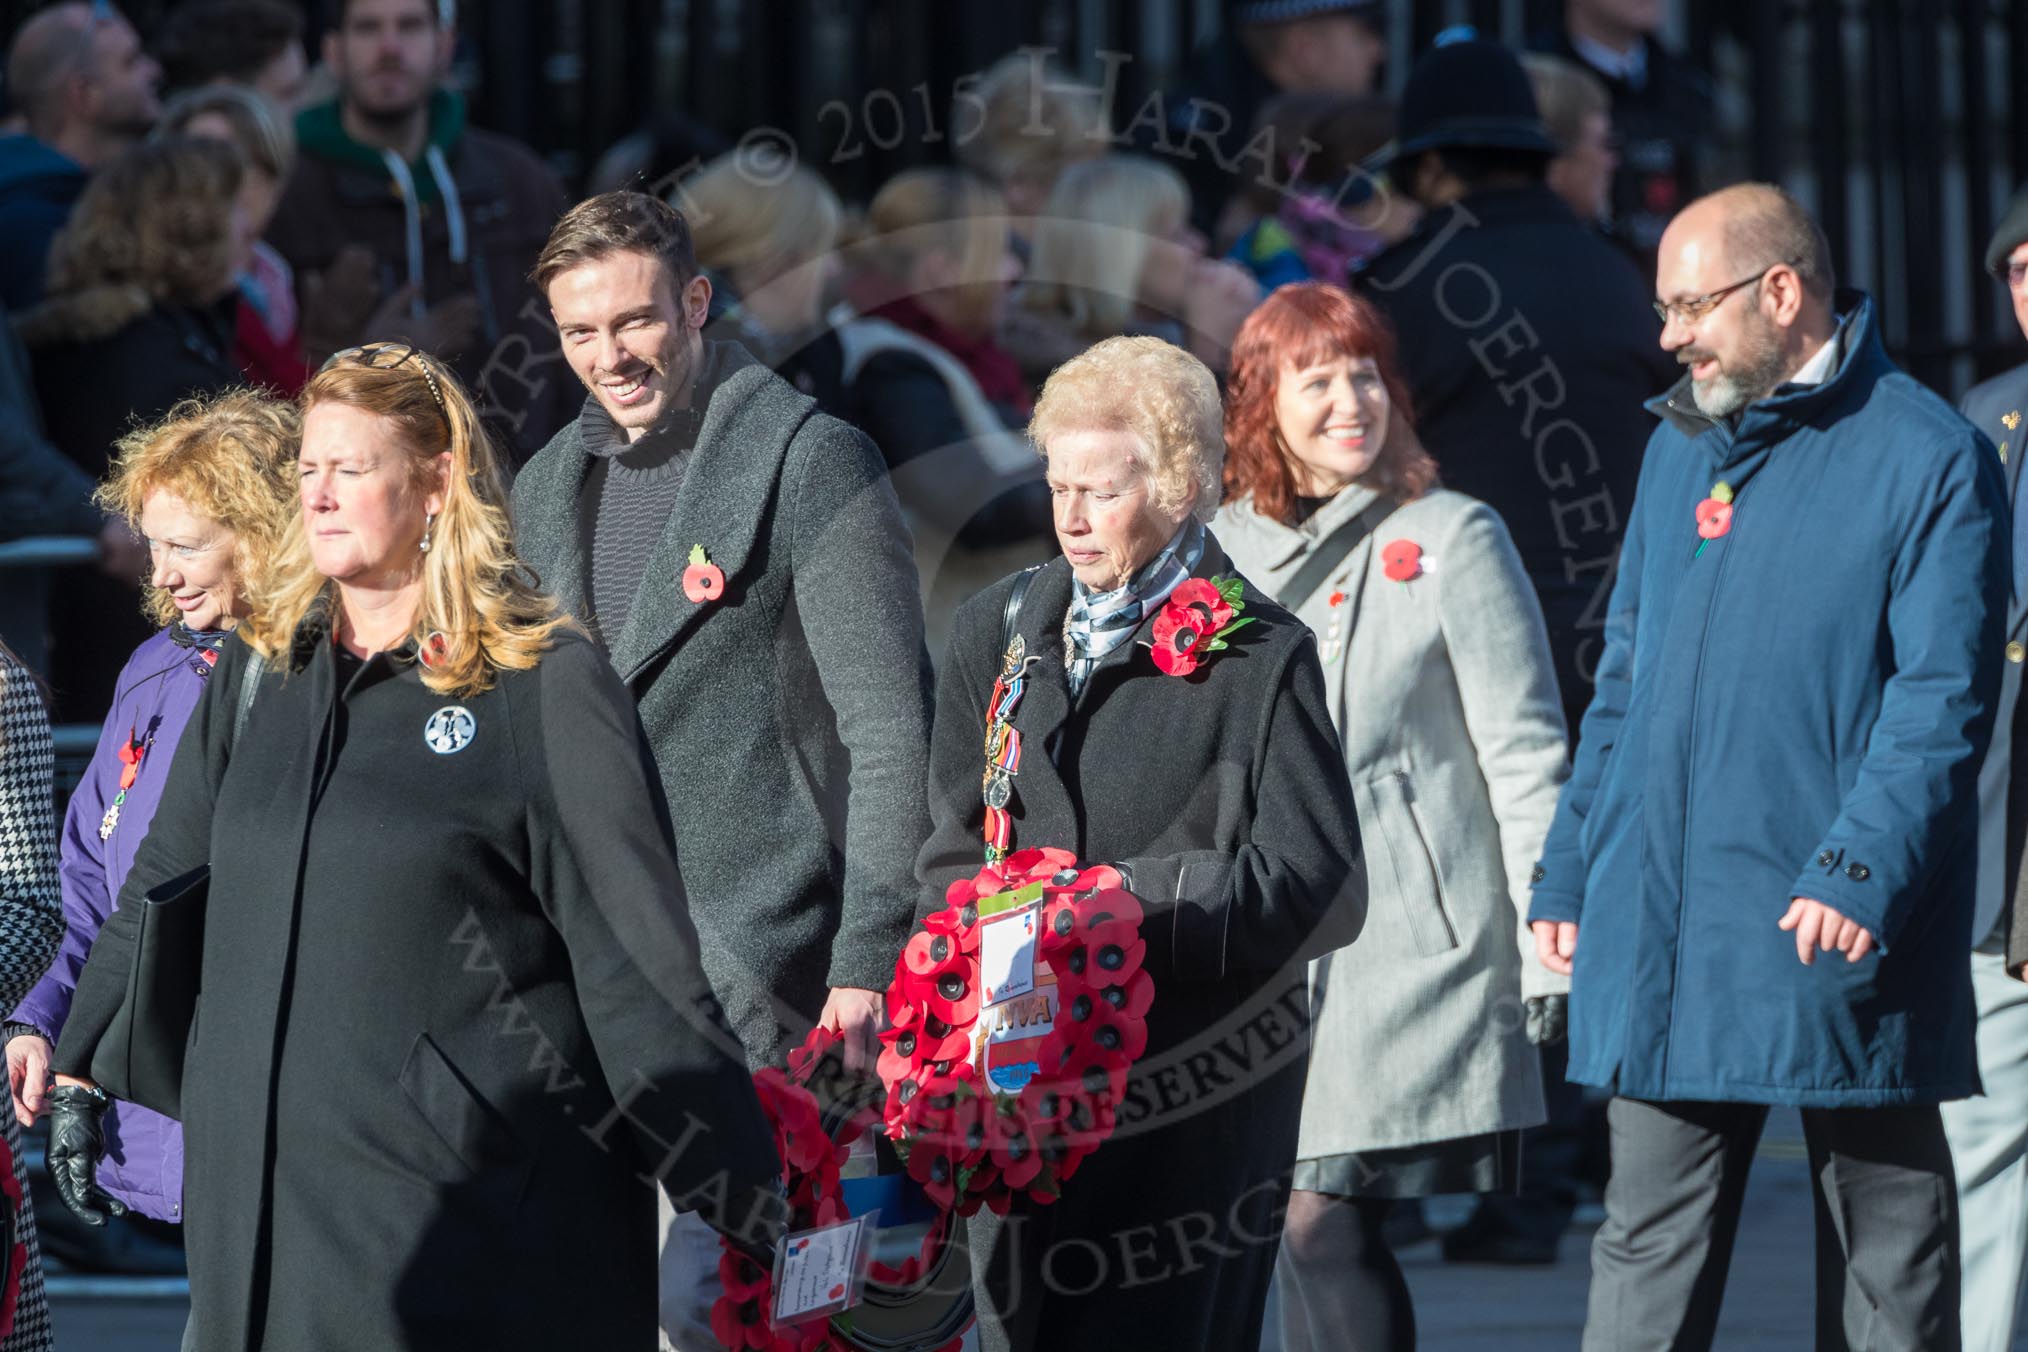 March Past, Remembrance Sunday at the Cenotaph 2016: M22 The Royal British Legion - Civilians.
Cenotaph, Whitehall, London SW1,
London,
Greater London,
United Kingdom,
on 13 November 2016 at 13:16, image #2685